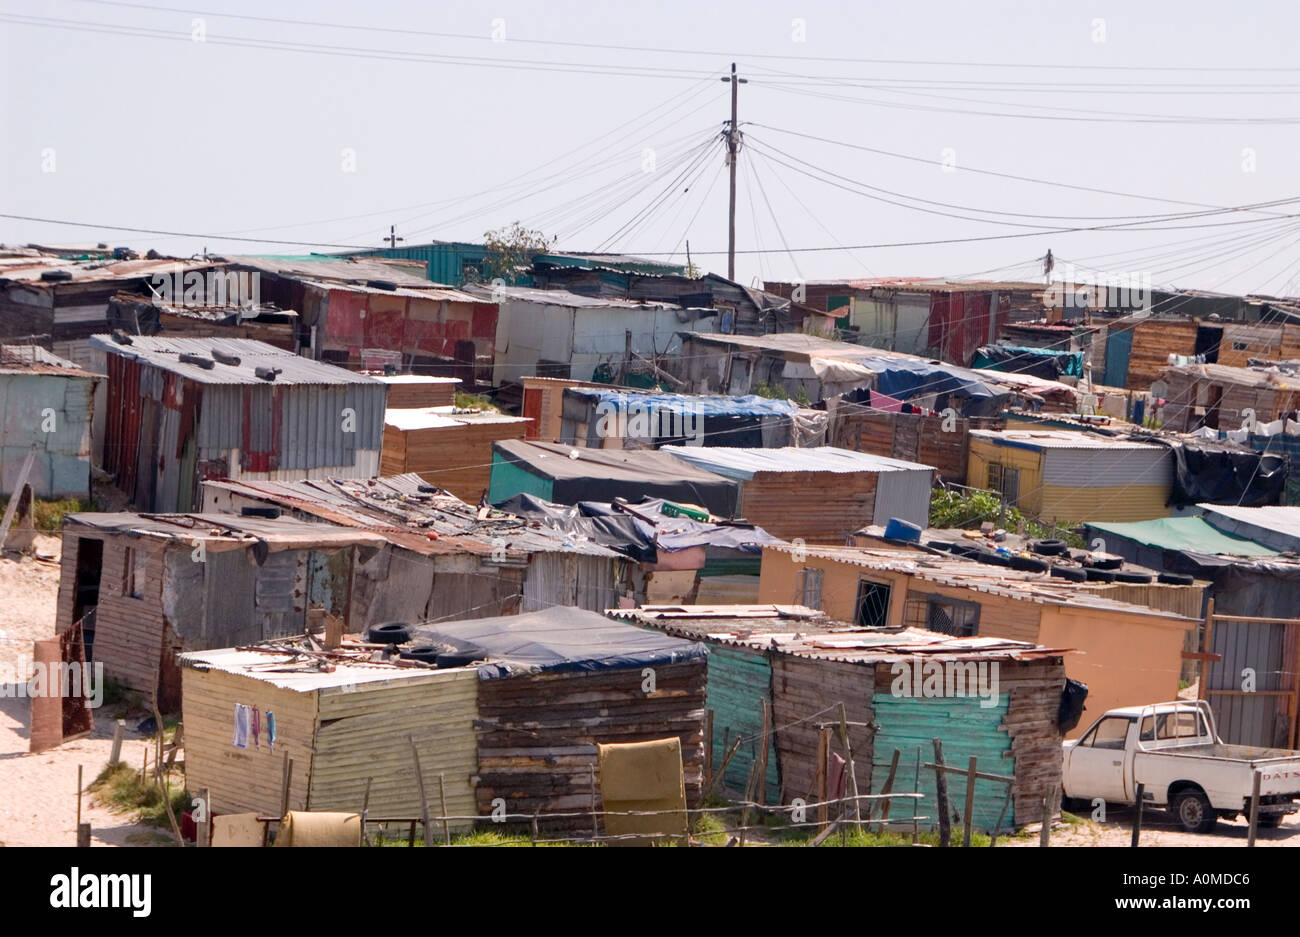 A view of shanties with power lines overhead in a township Cape Town South Africa Stock Photo